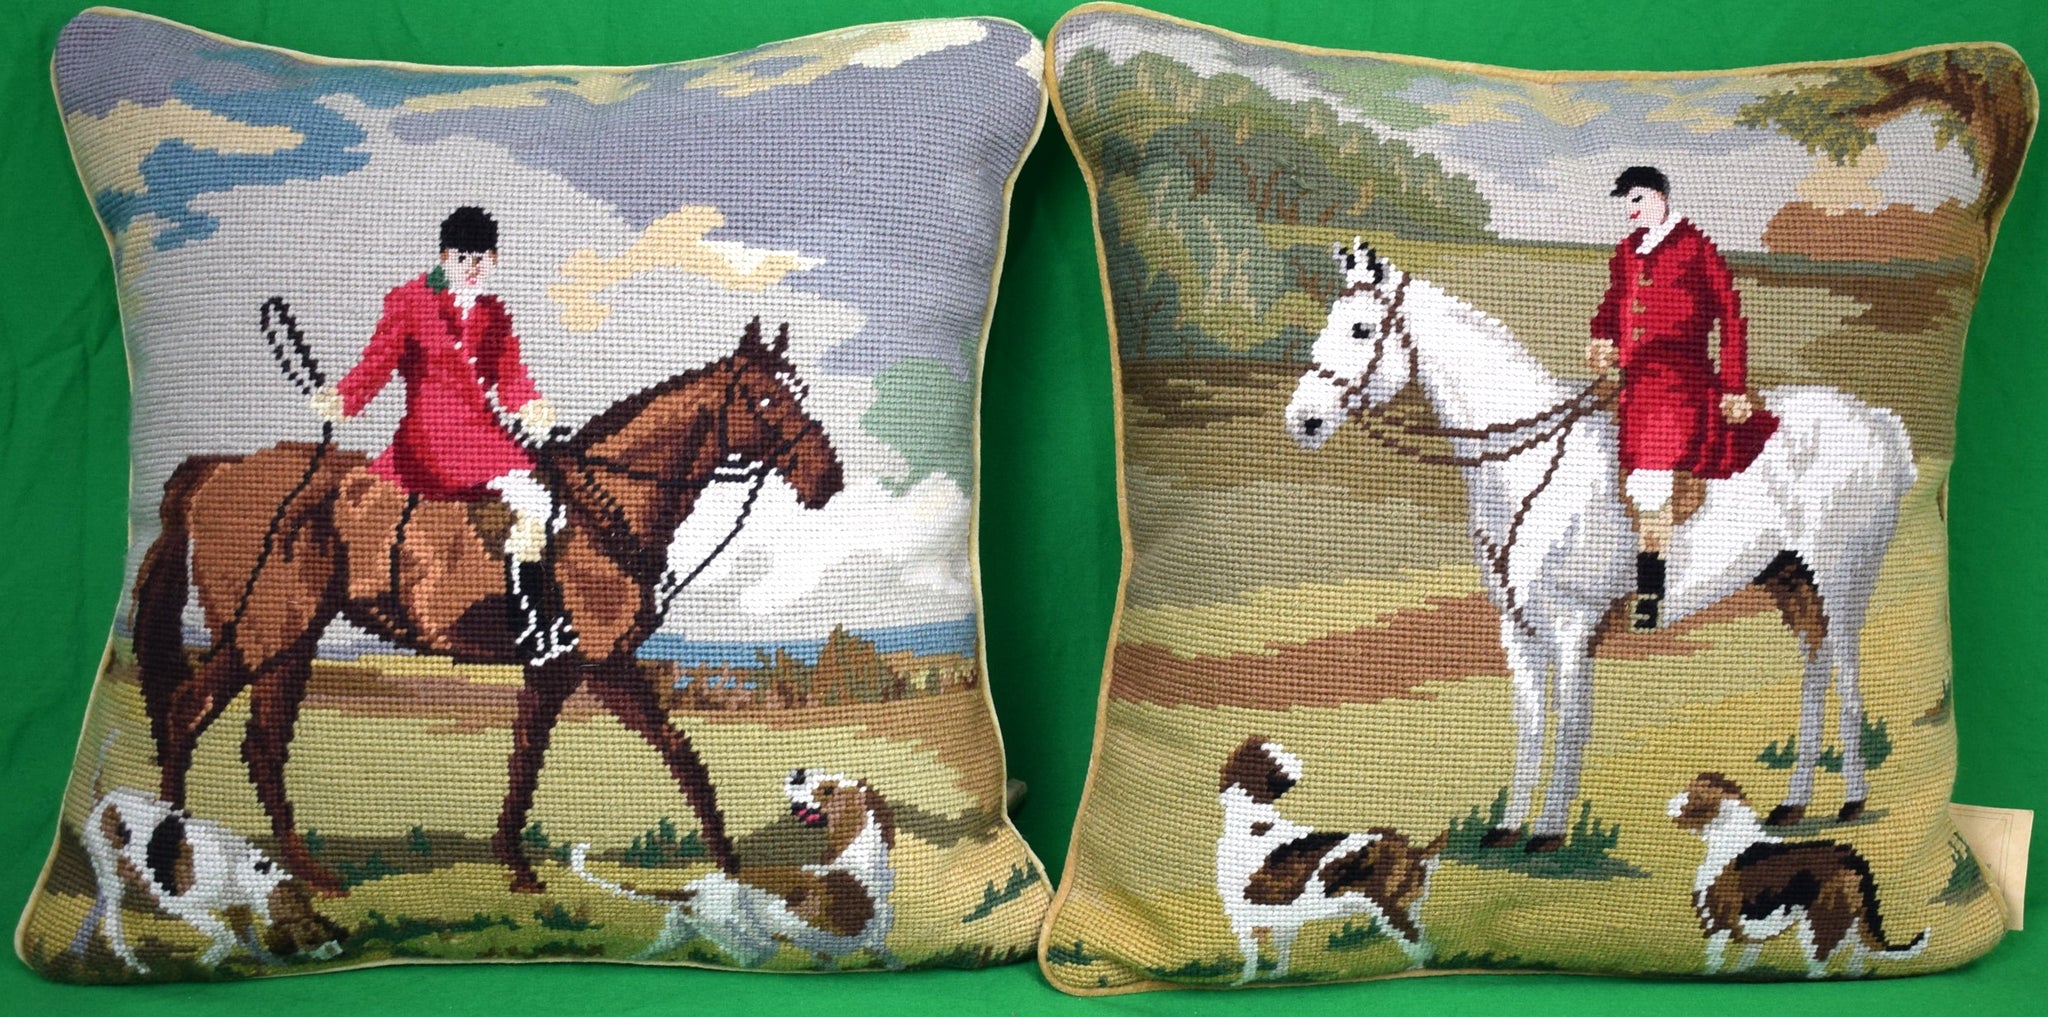 Pair of 19th century needlepoint pillows for sale online